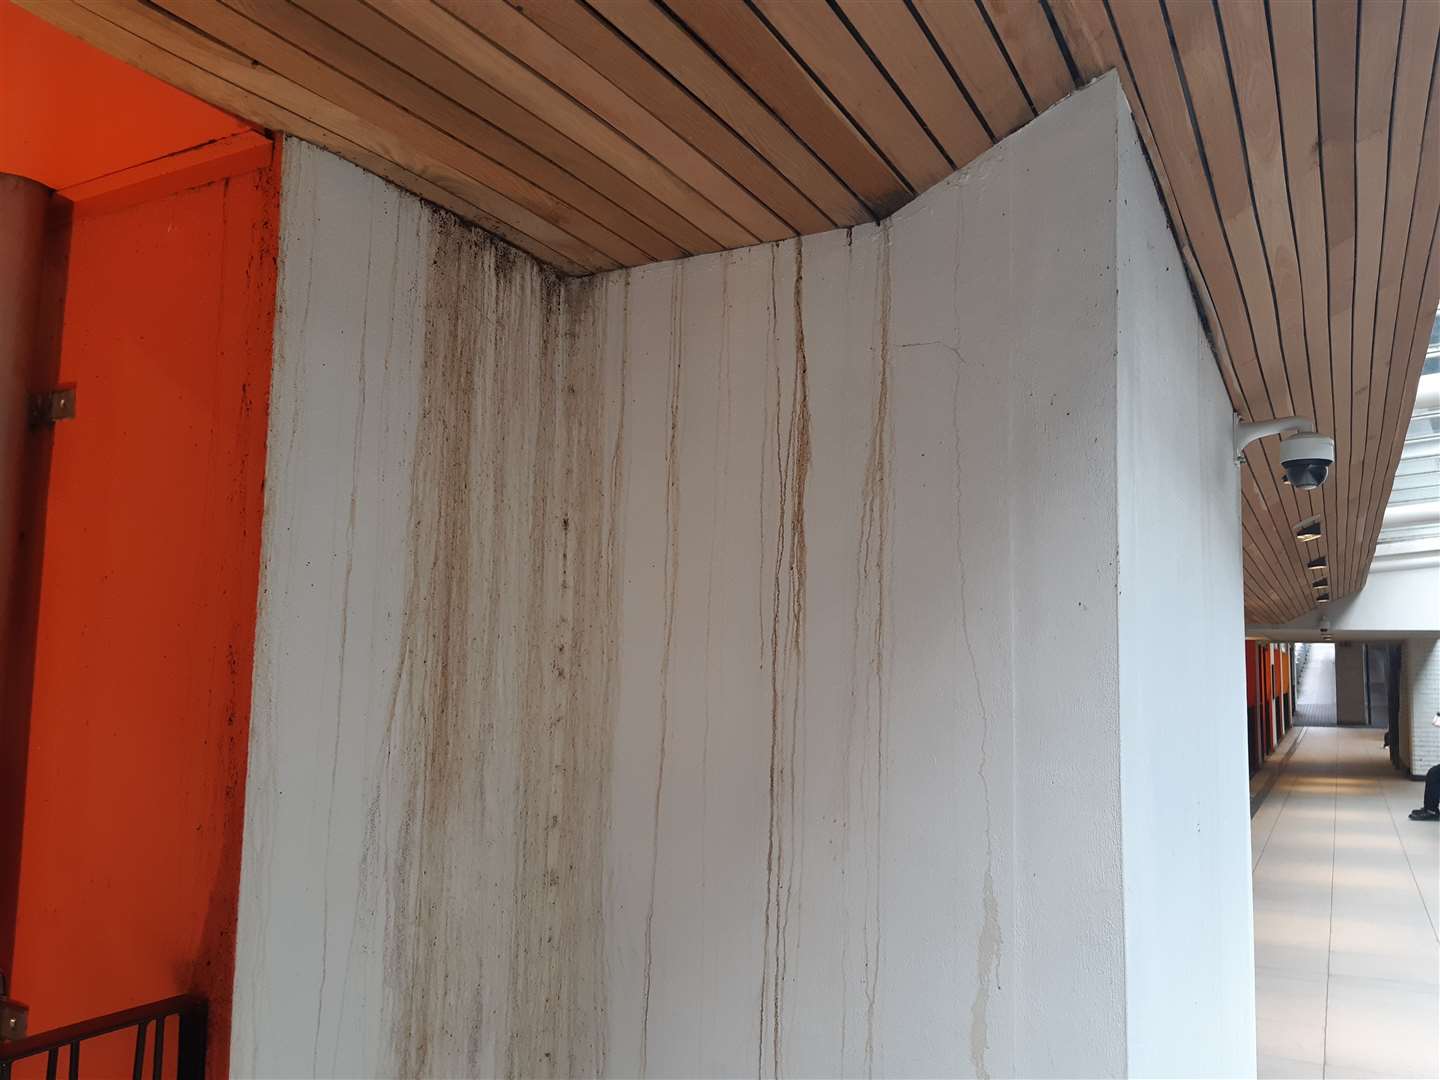 Multiple walls along the bus station are affected by the leak